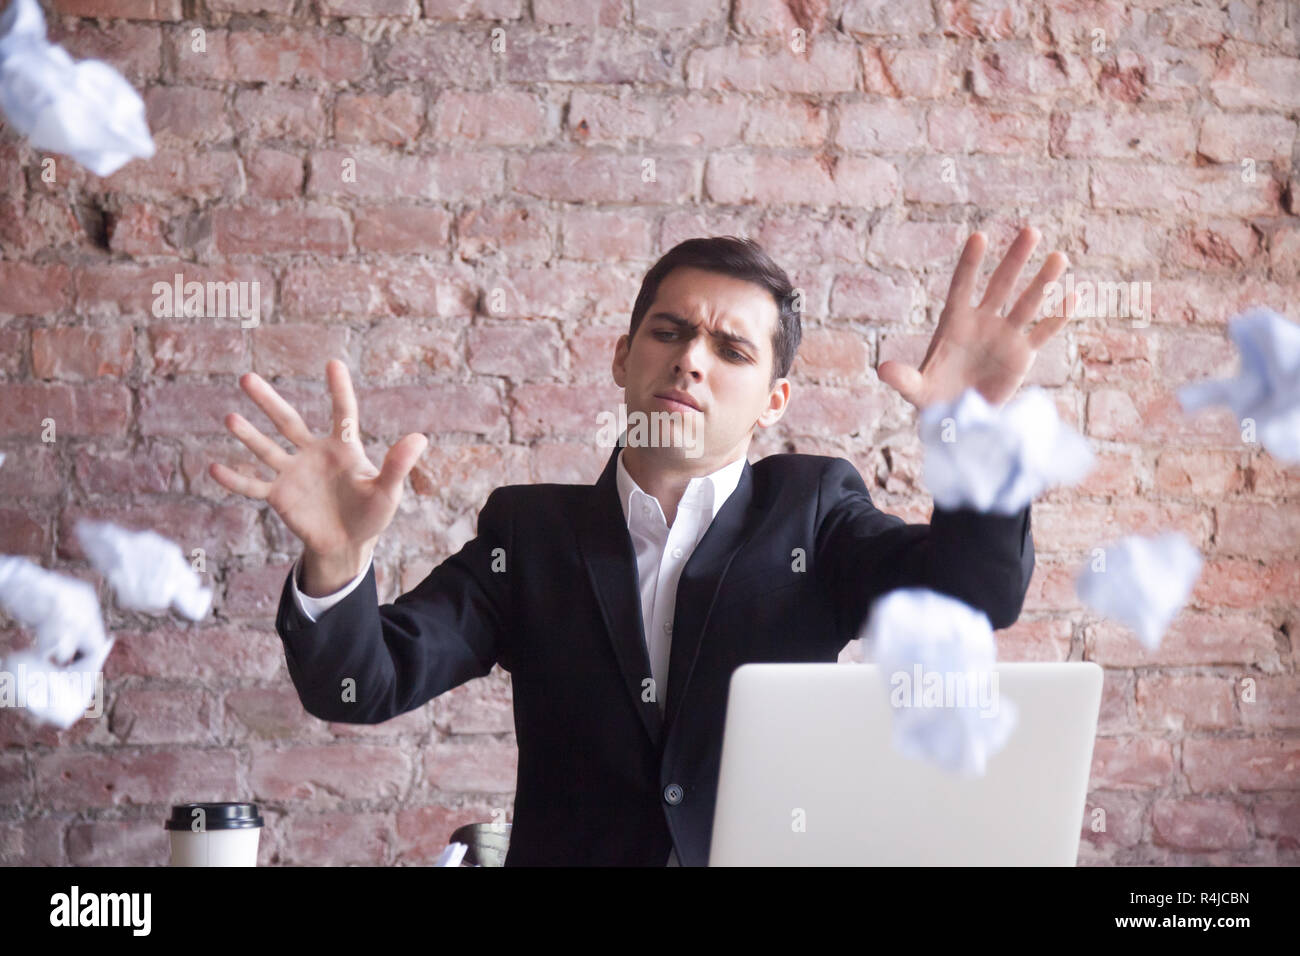 Angry tired businessman quits job, throws crumpled paper Stock Photo